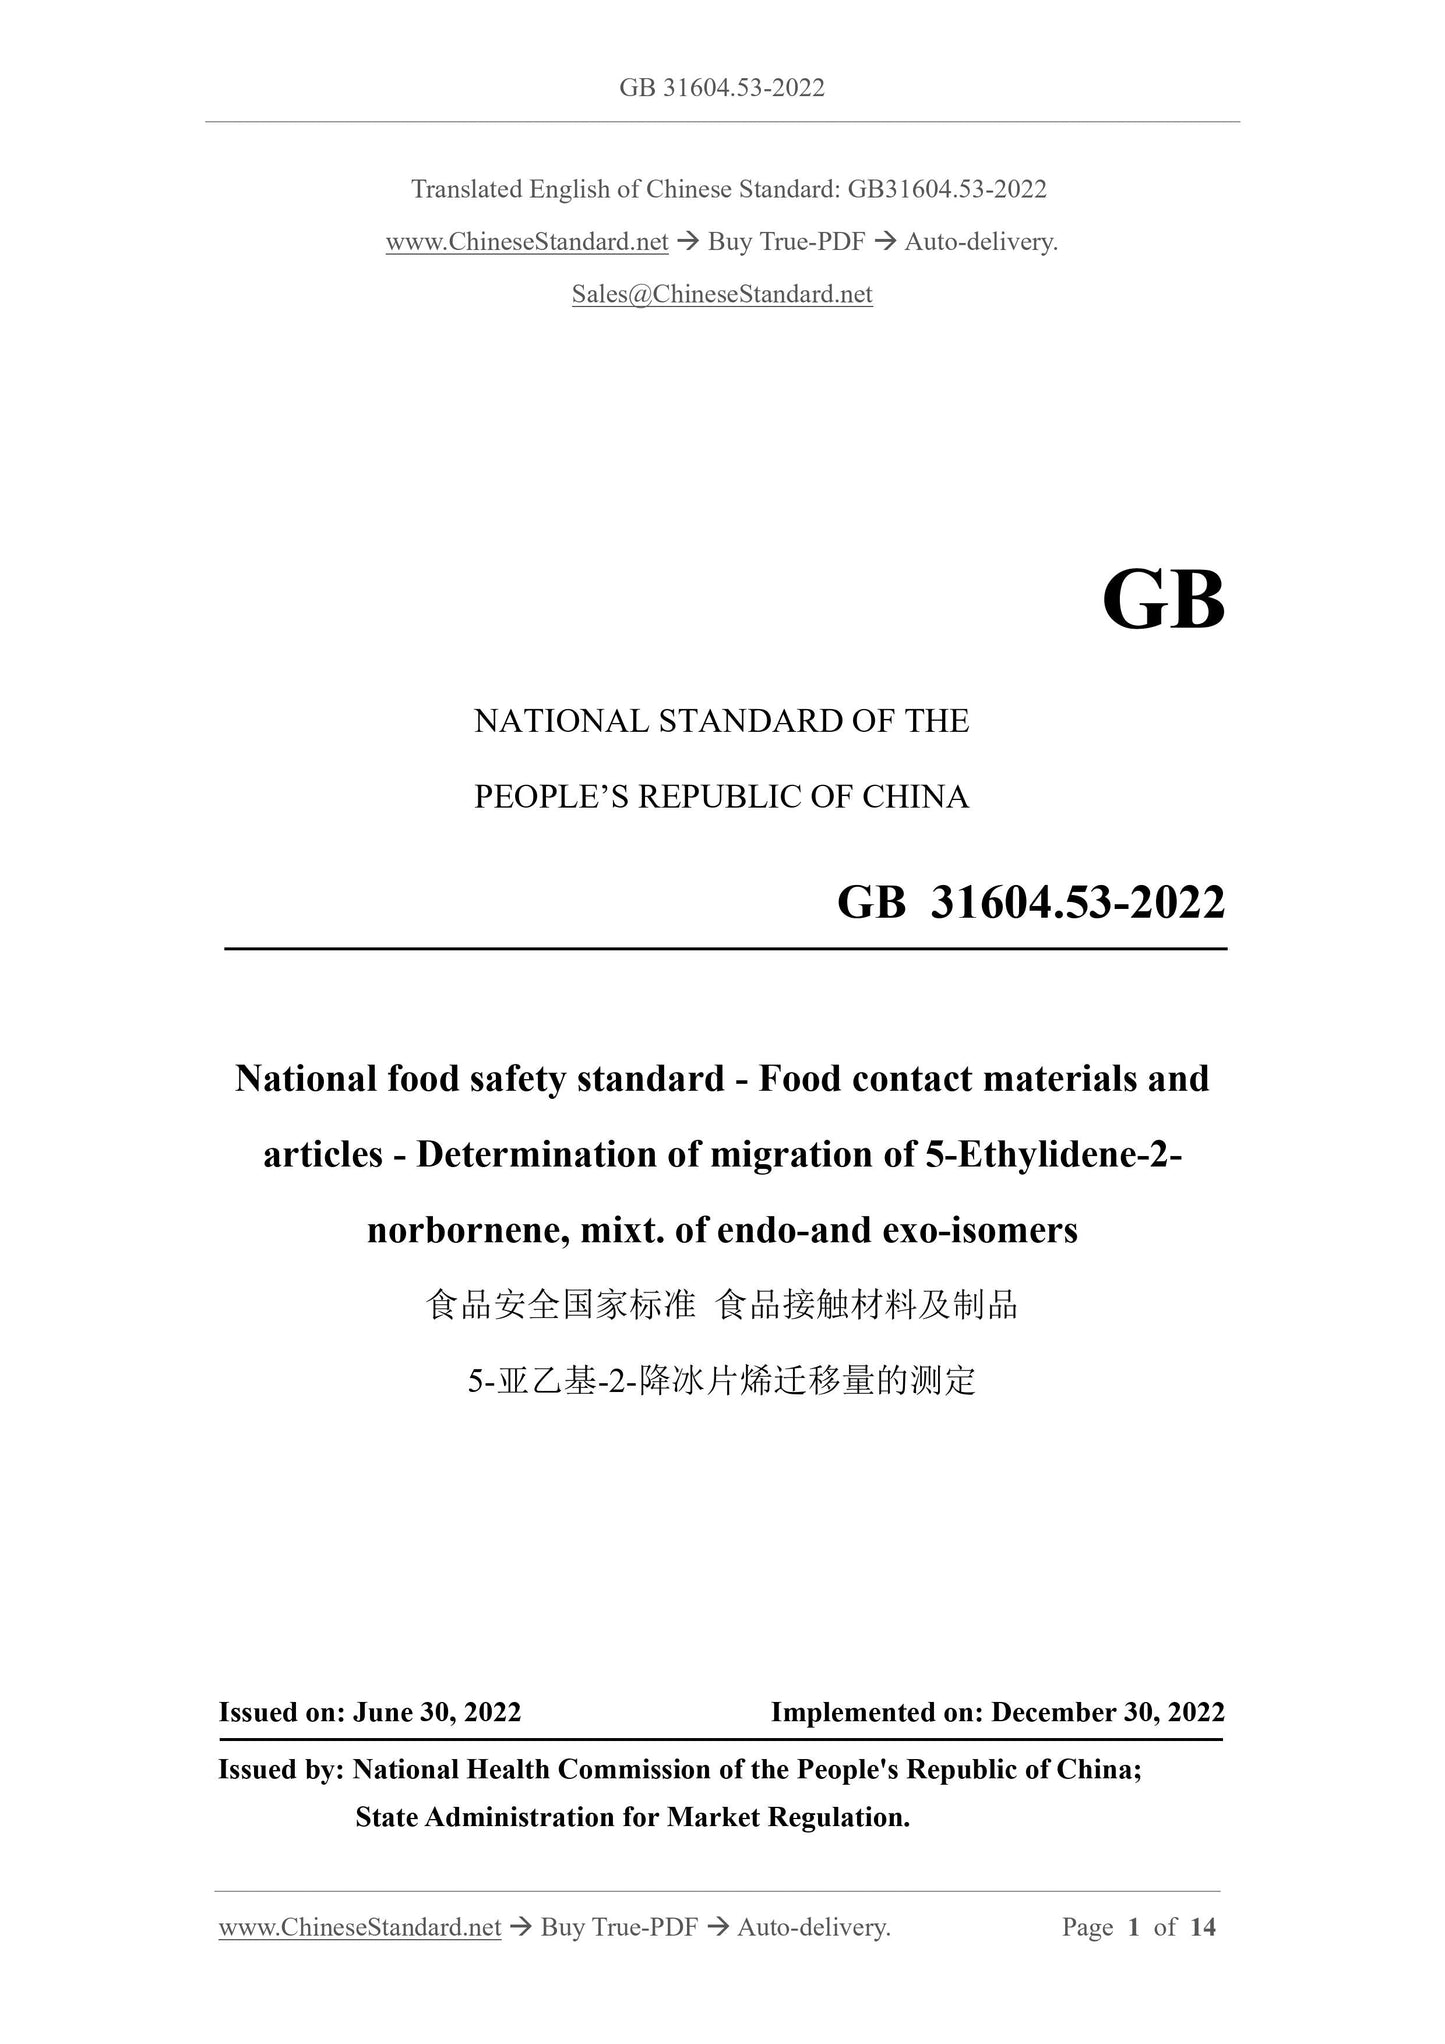 GB 31604.53-2022 Page 1